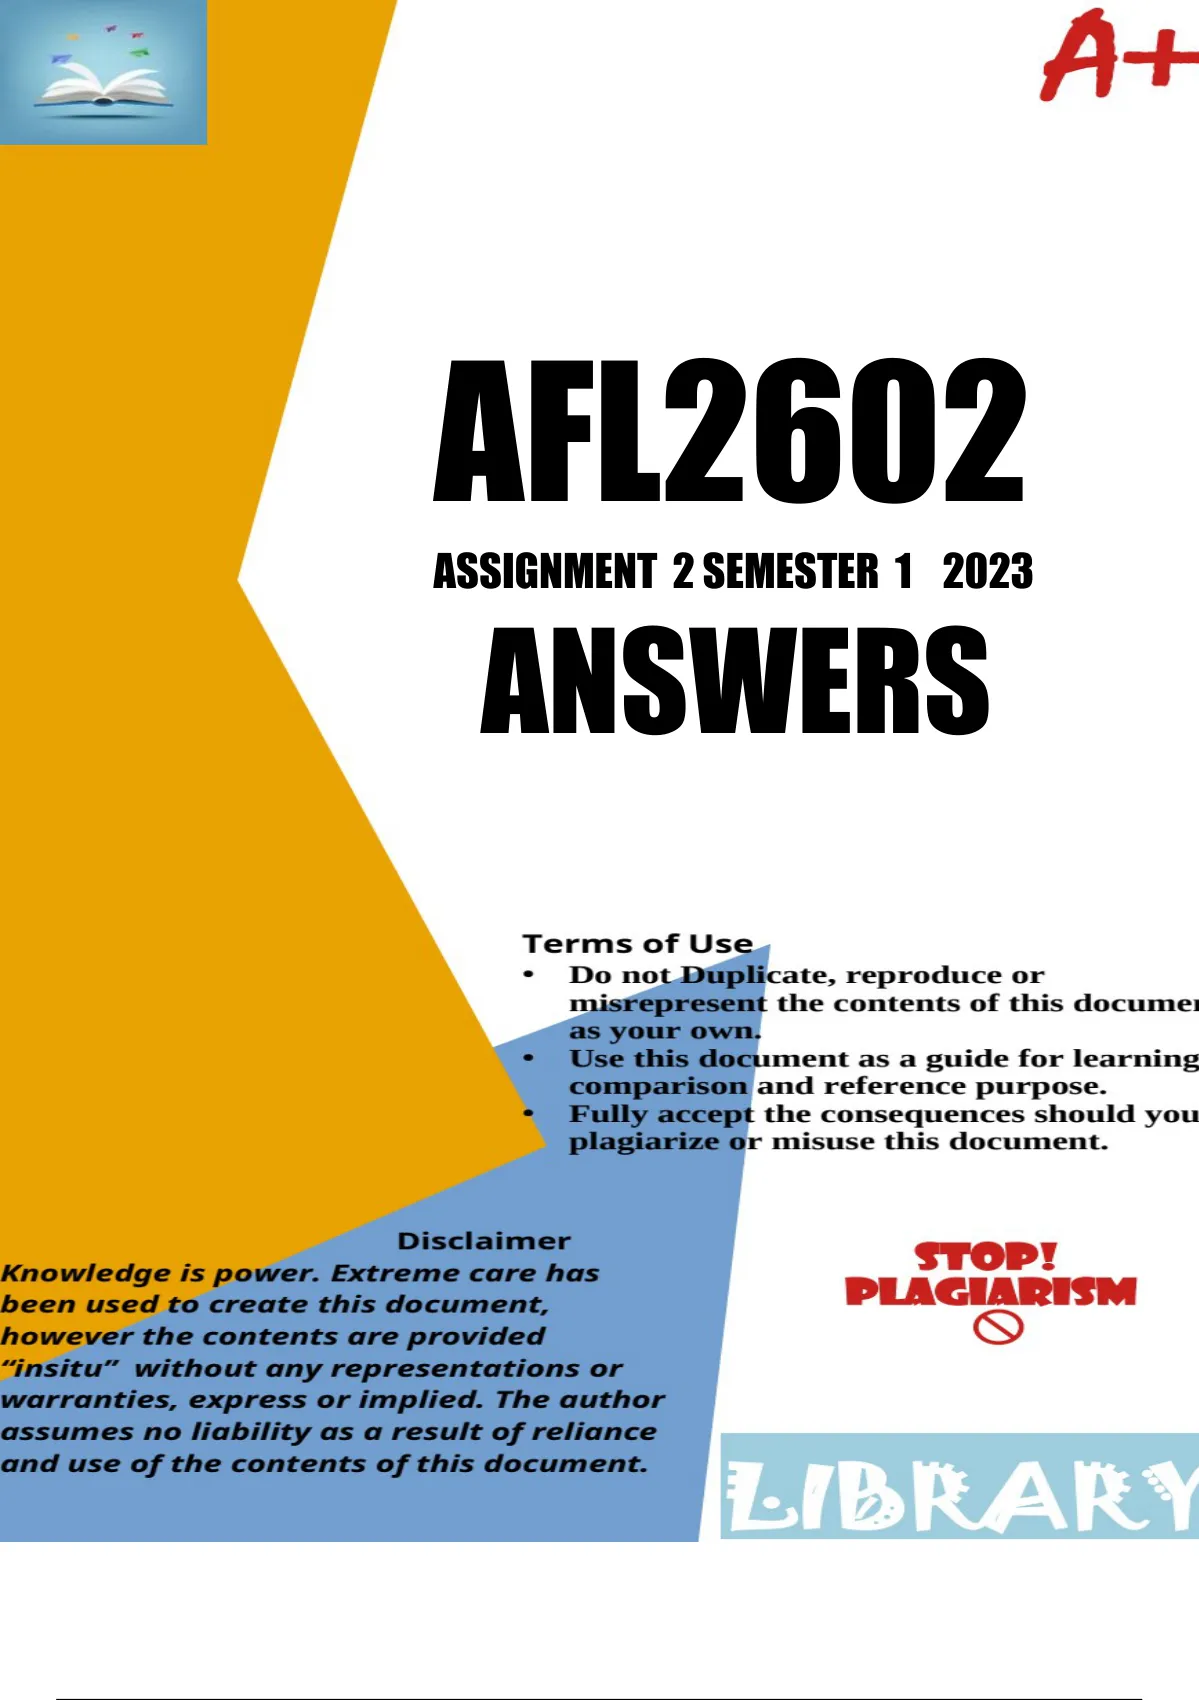 afl2602 assignment 2 answers